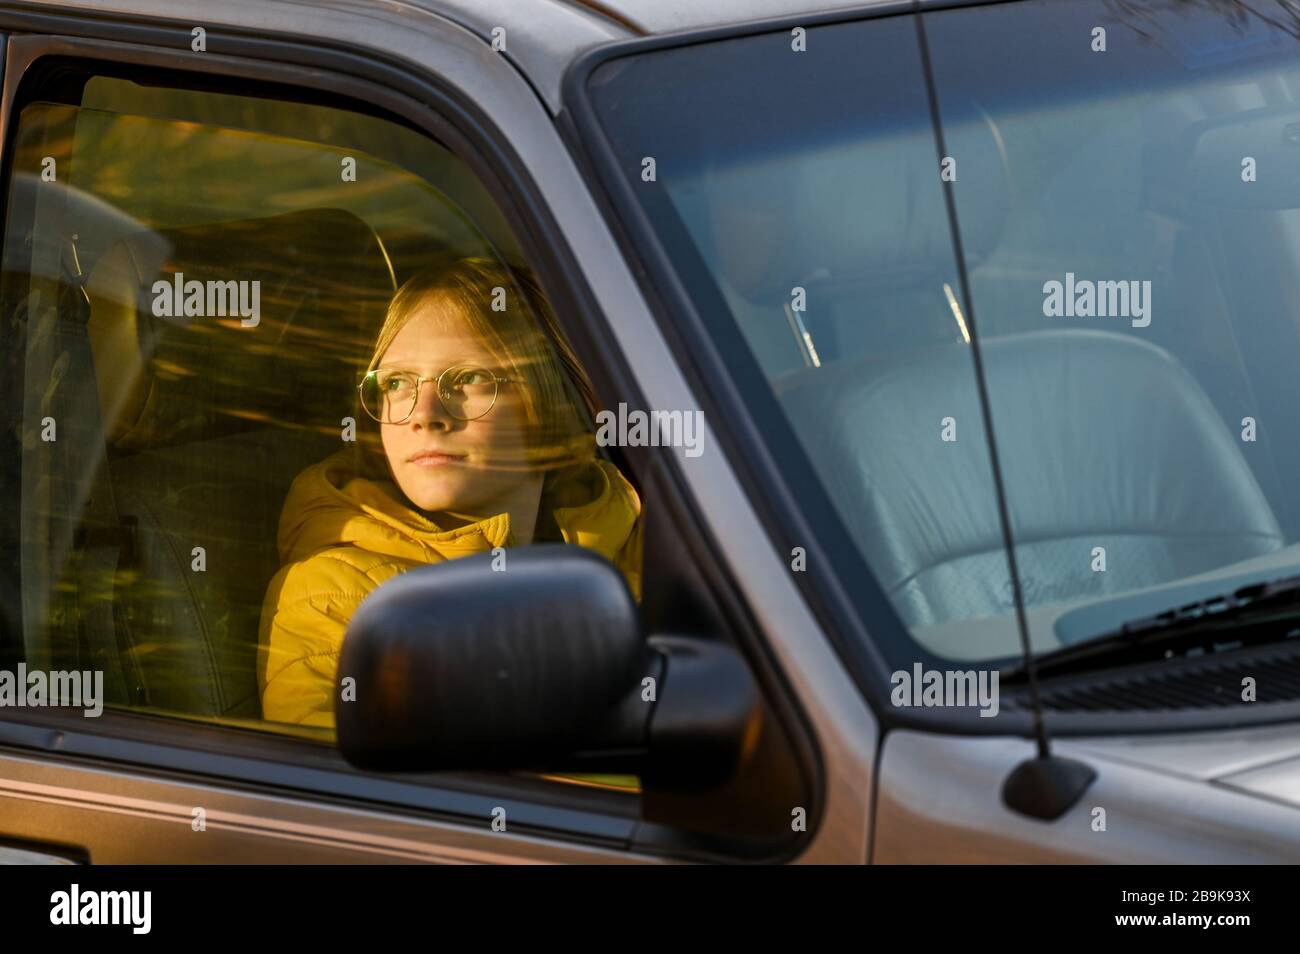 Boy sitting in car looking out passanger window tword setting sun Stock Photo